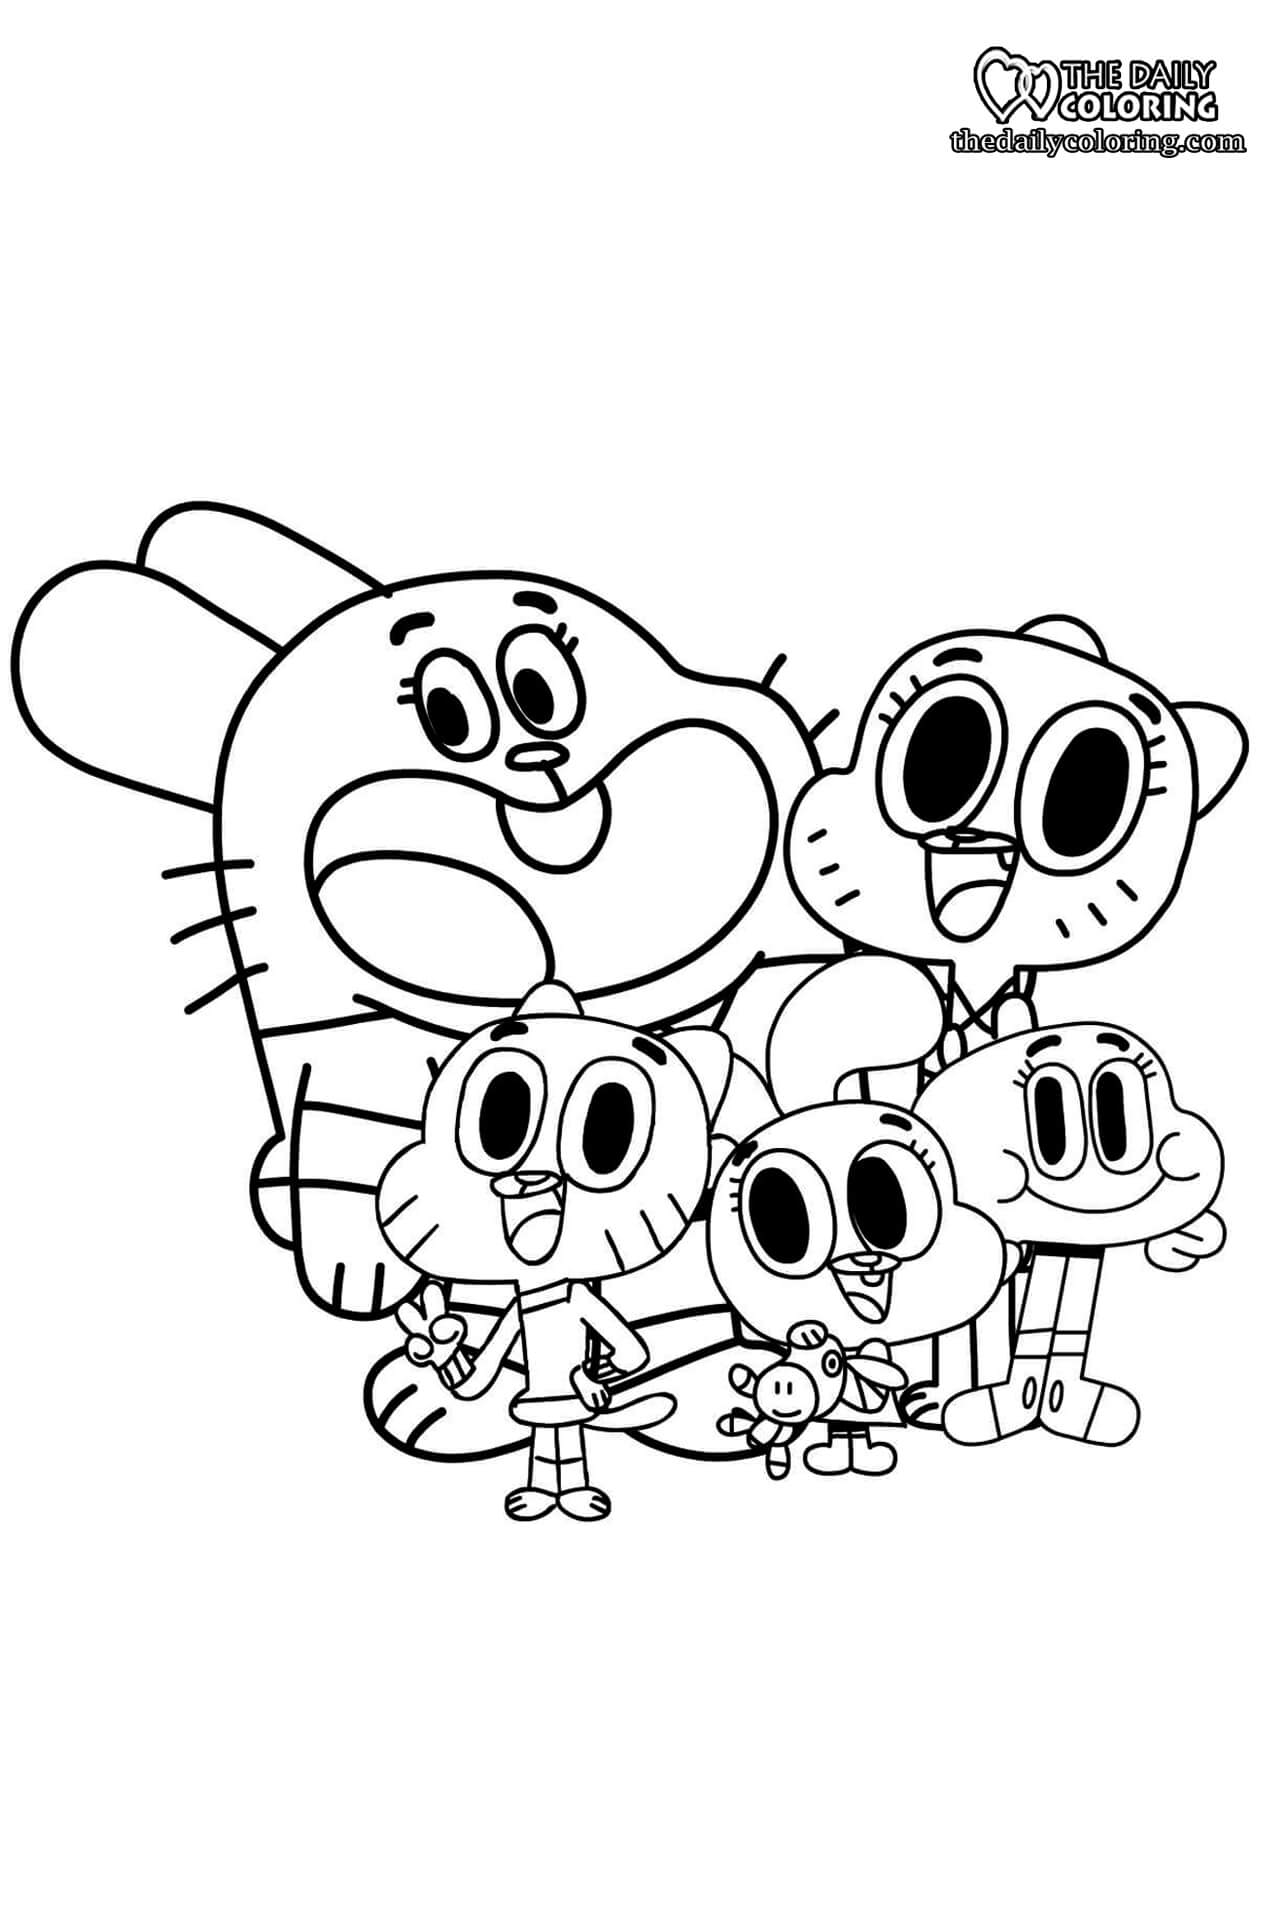 gumball-coloring-page